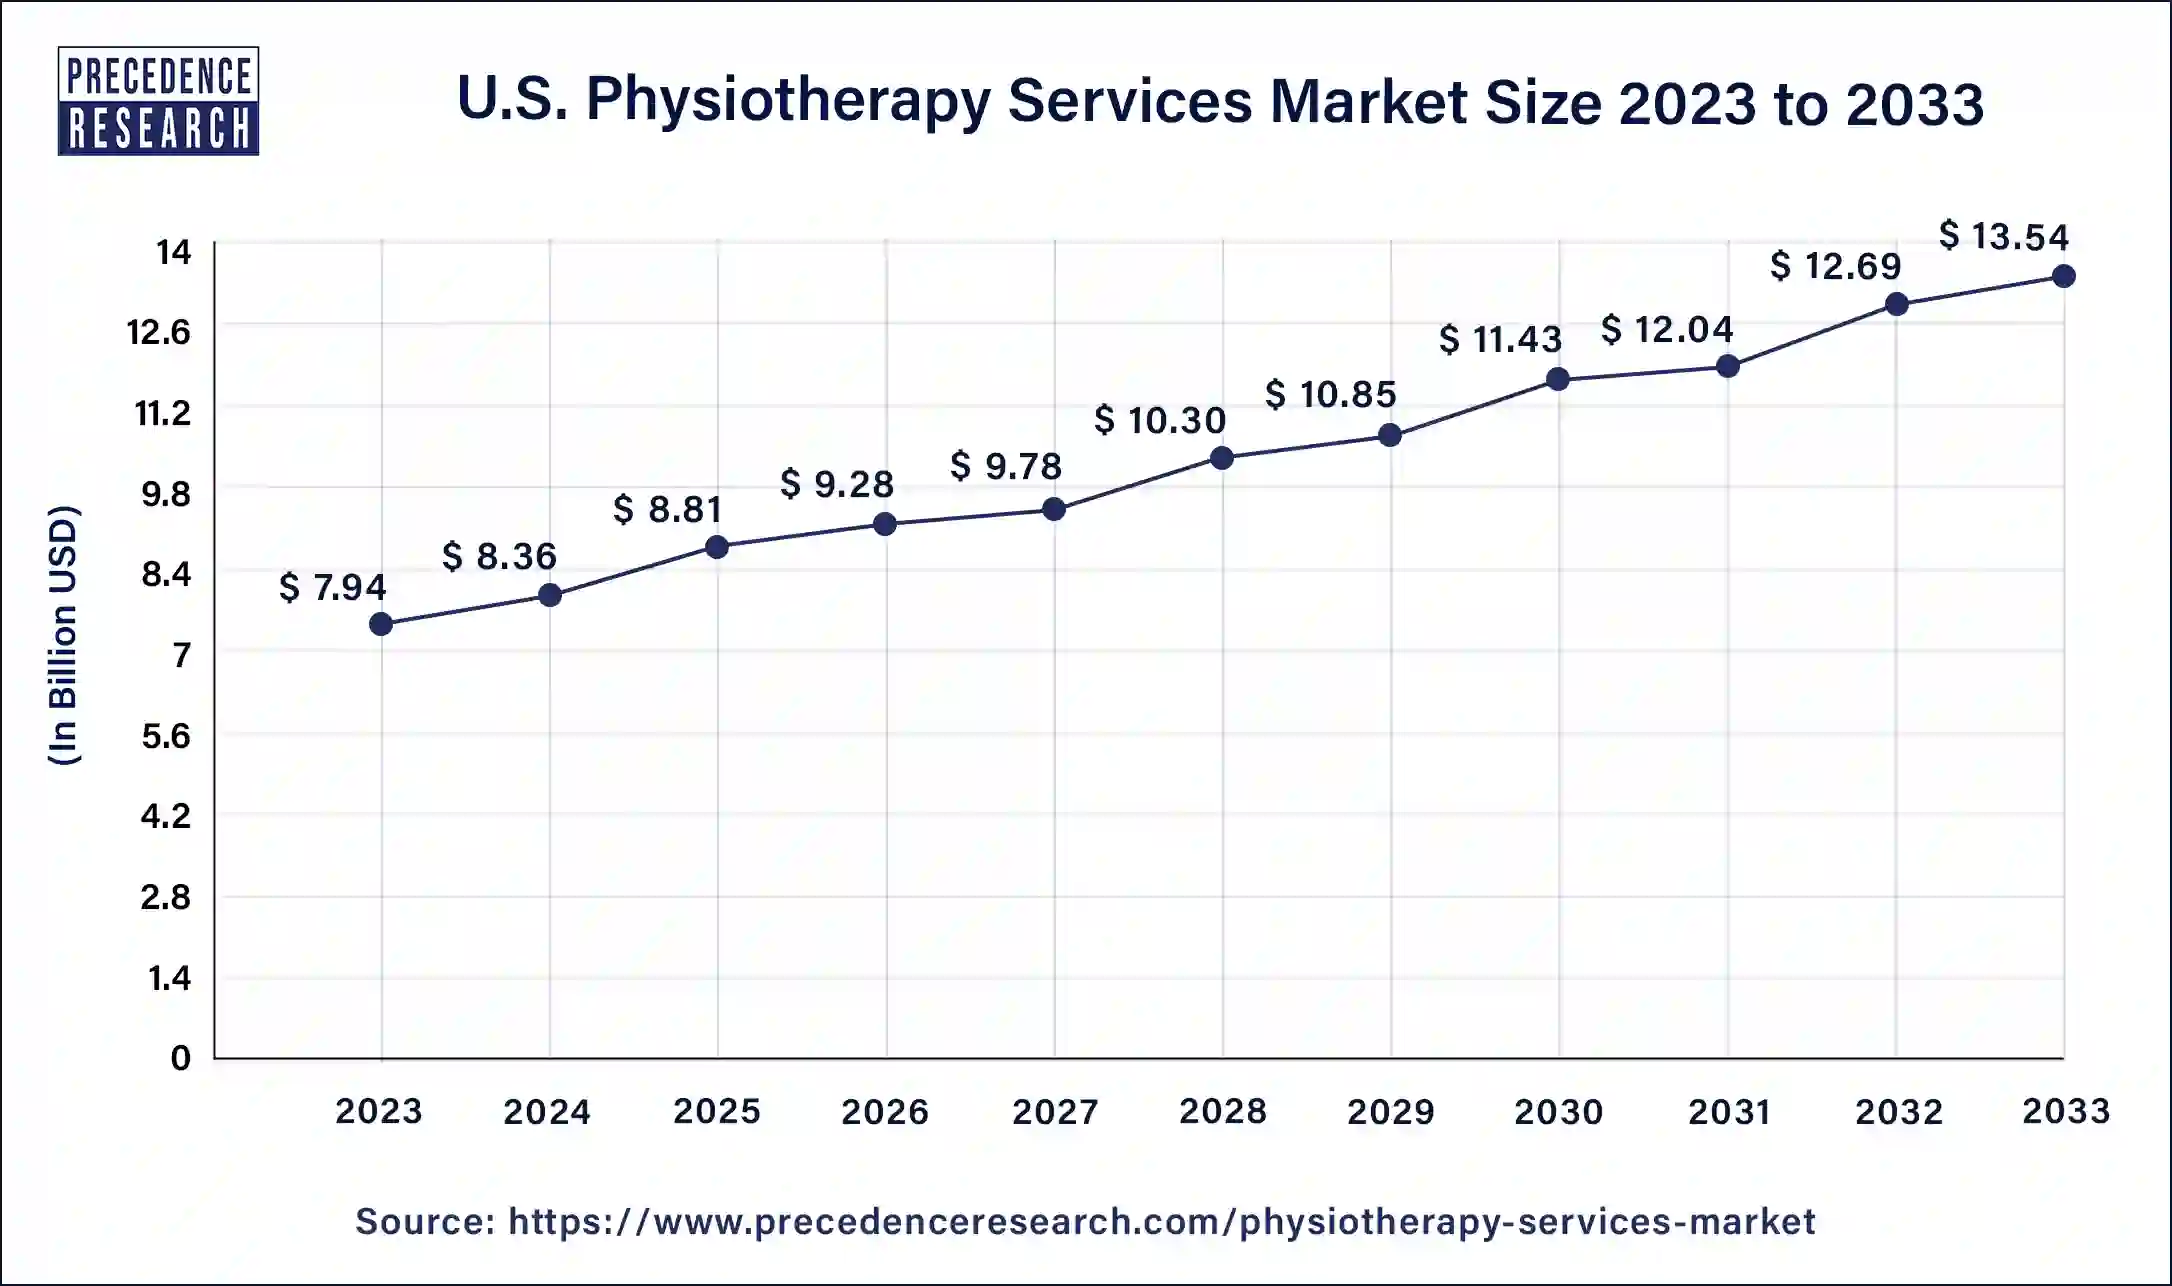 U.S. Physiotherapy Services Market Size 2024 to 2033